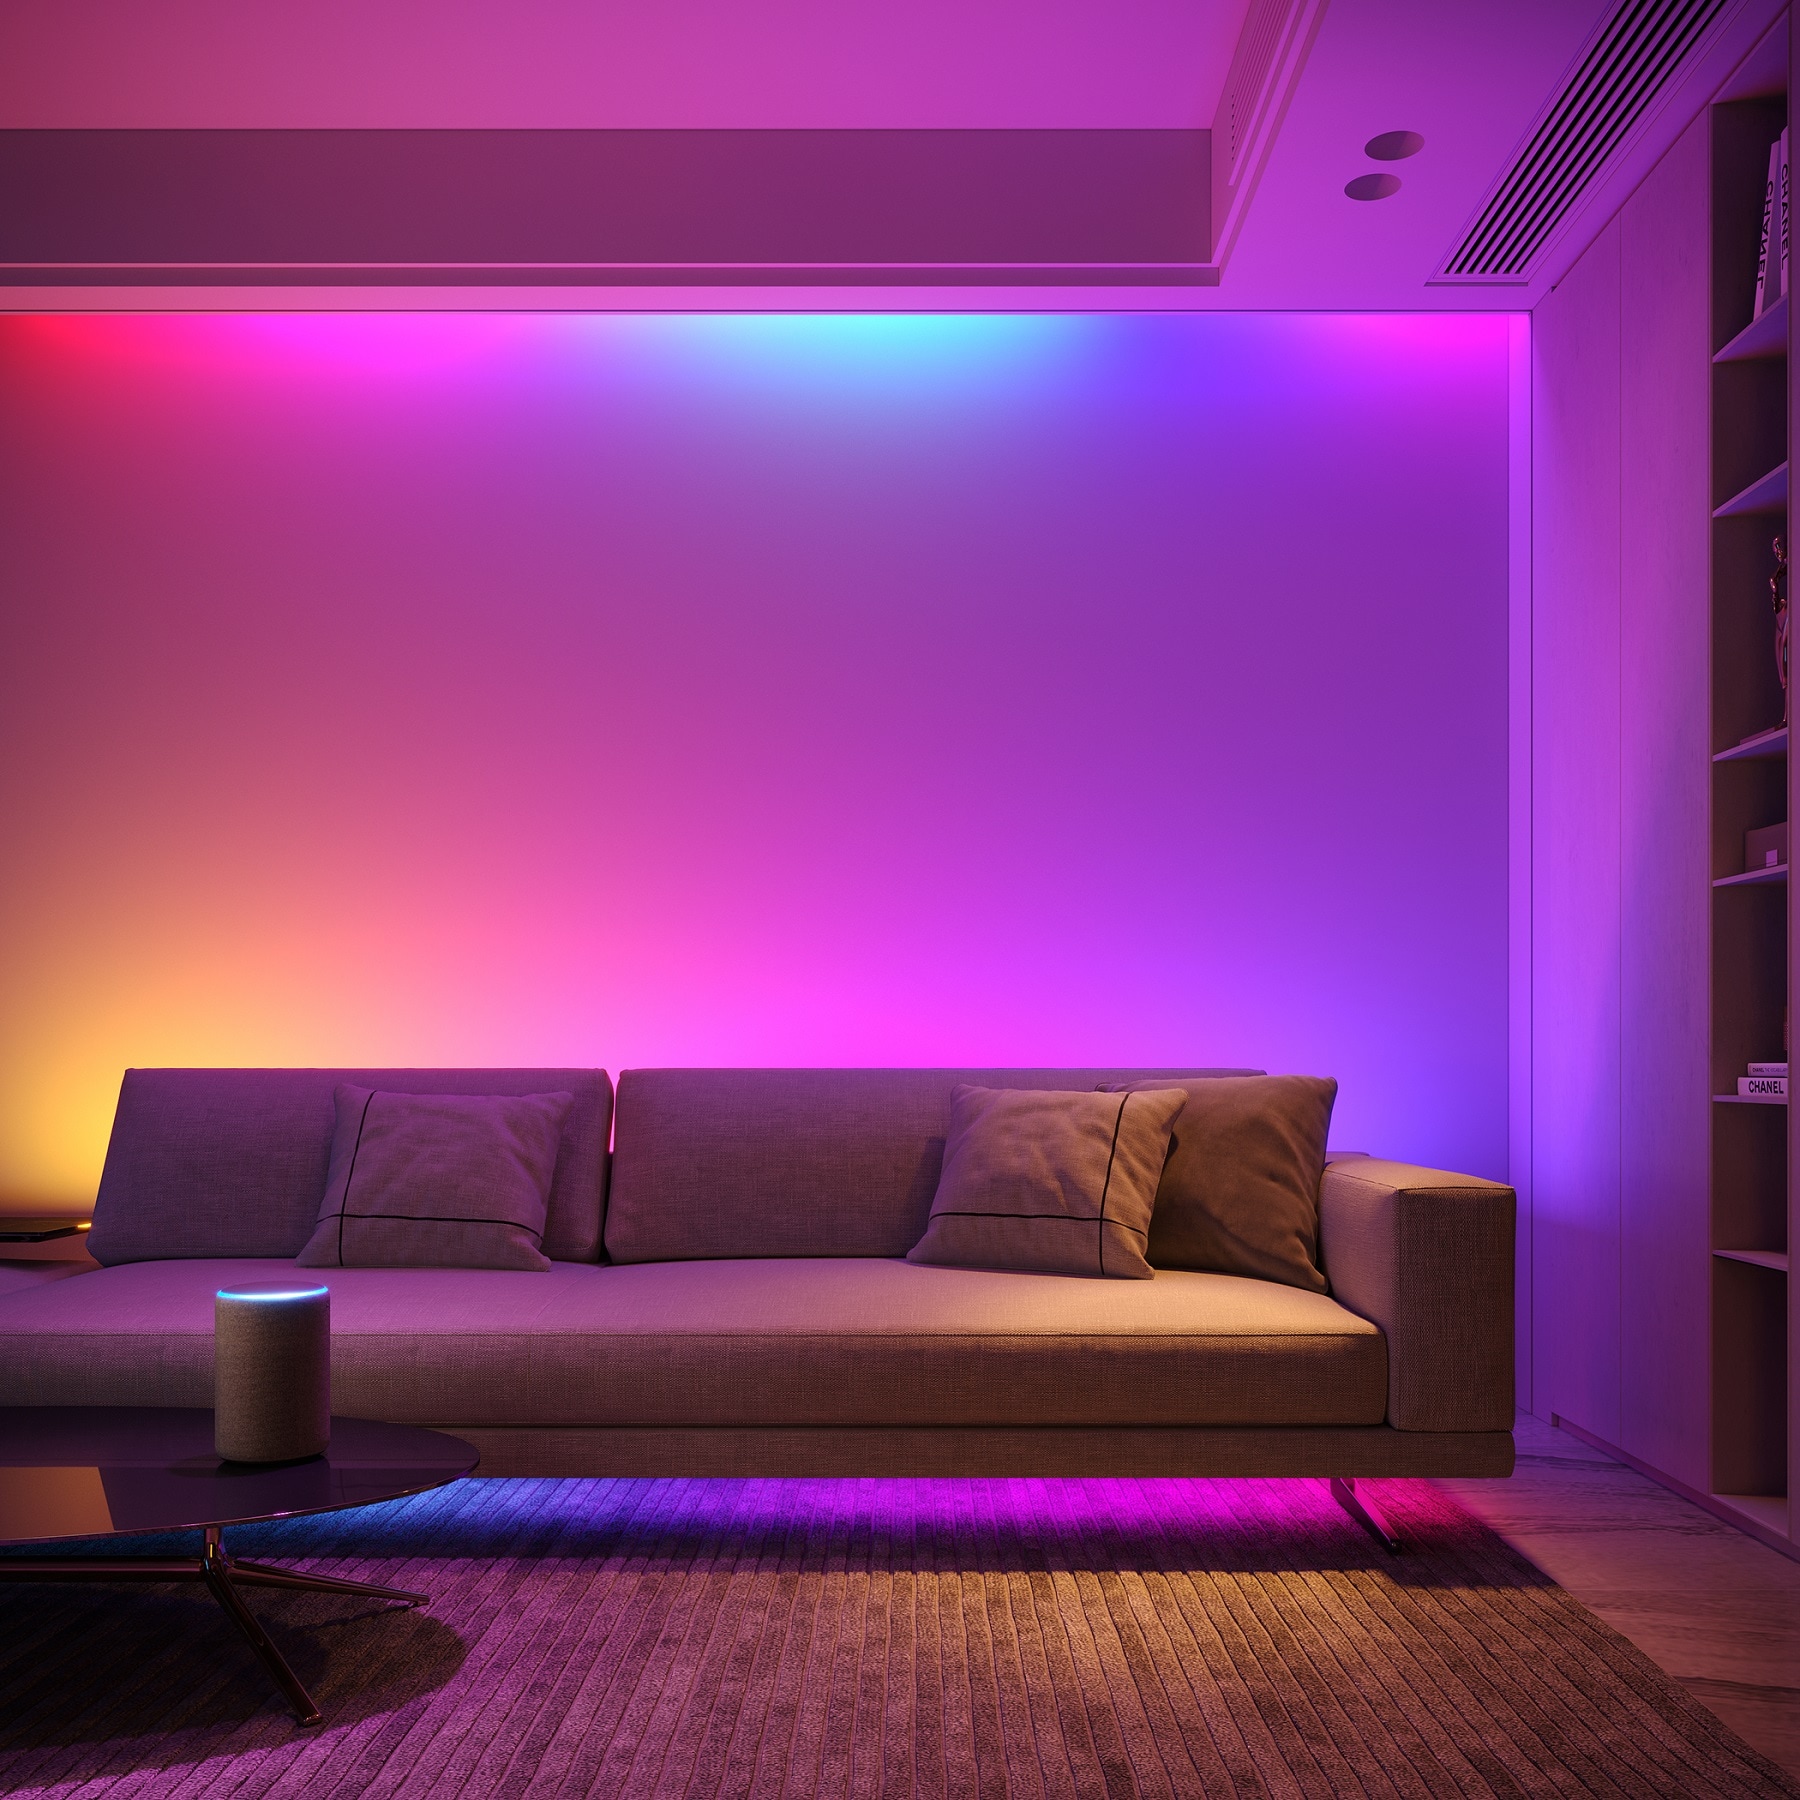 Govee RGBIC LED Smart Strip Light 24.9ft. Wi-Fi + Bluetooth, Color Changing, Dimmable, Energy Efficient, Voice Control